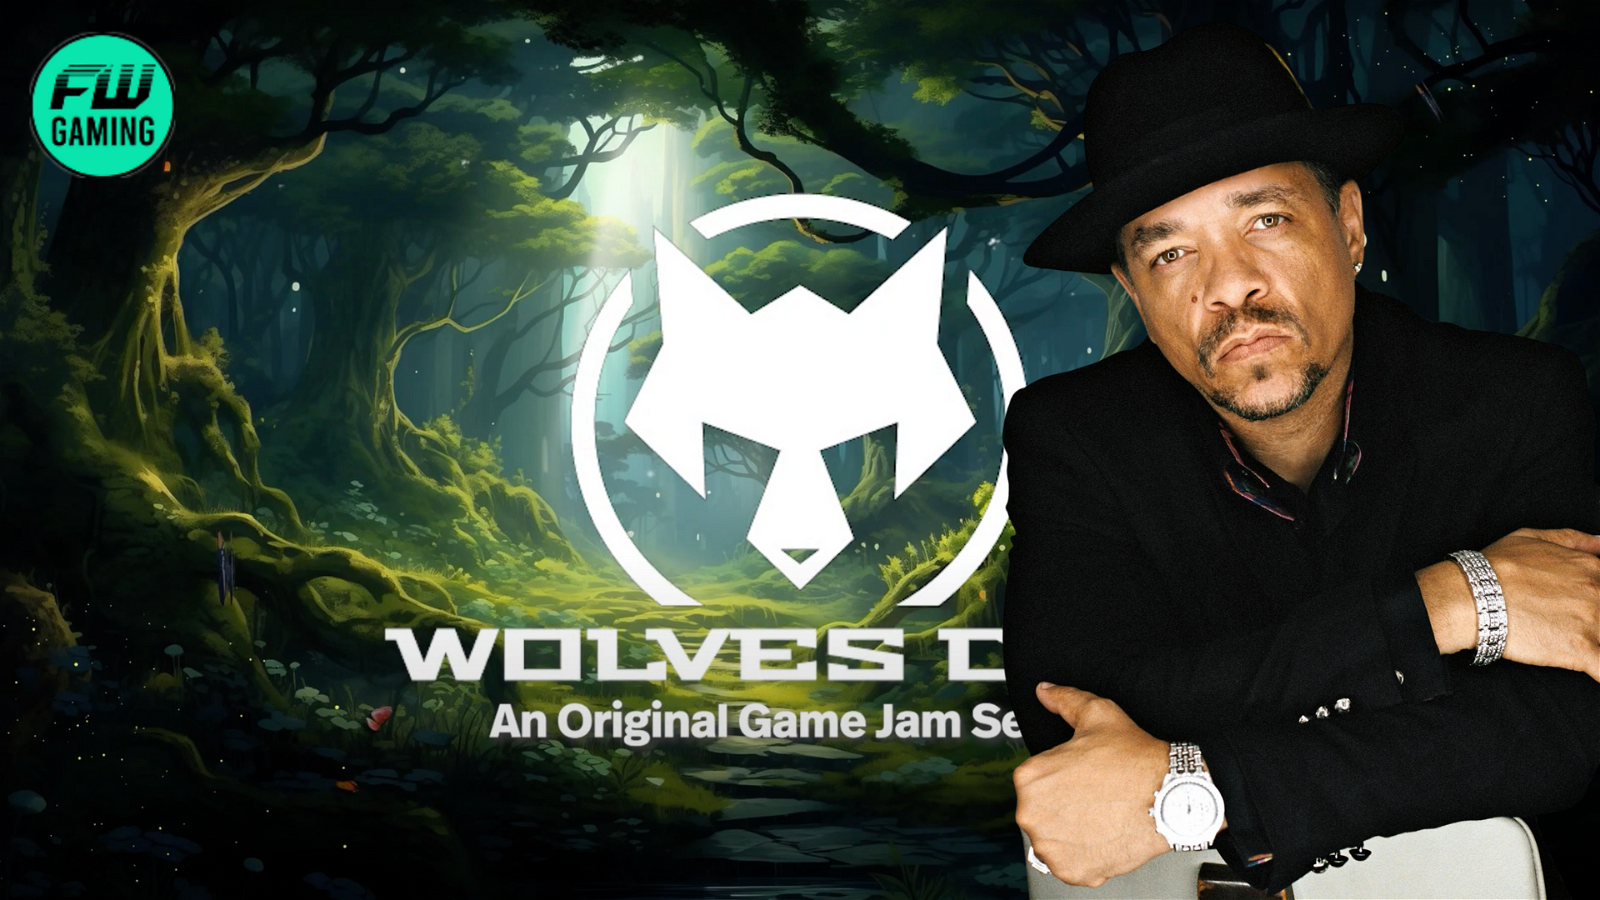 Shark Tank-Inspired 'Wolves Den' Announced to Revolutionise Indie Games With Judges Ice T, CliffyB, and Welyn Set to Break the Gaming Industry in Two